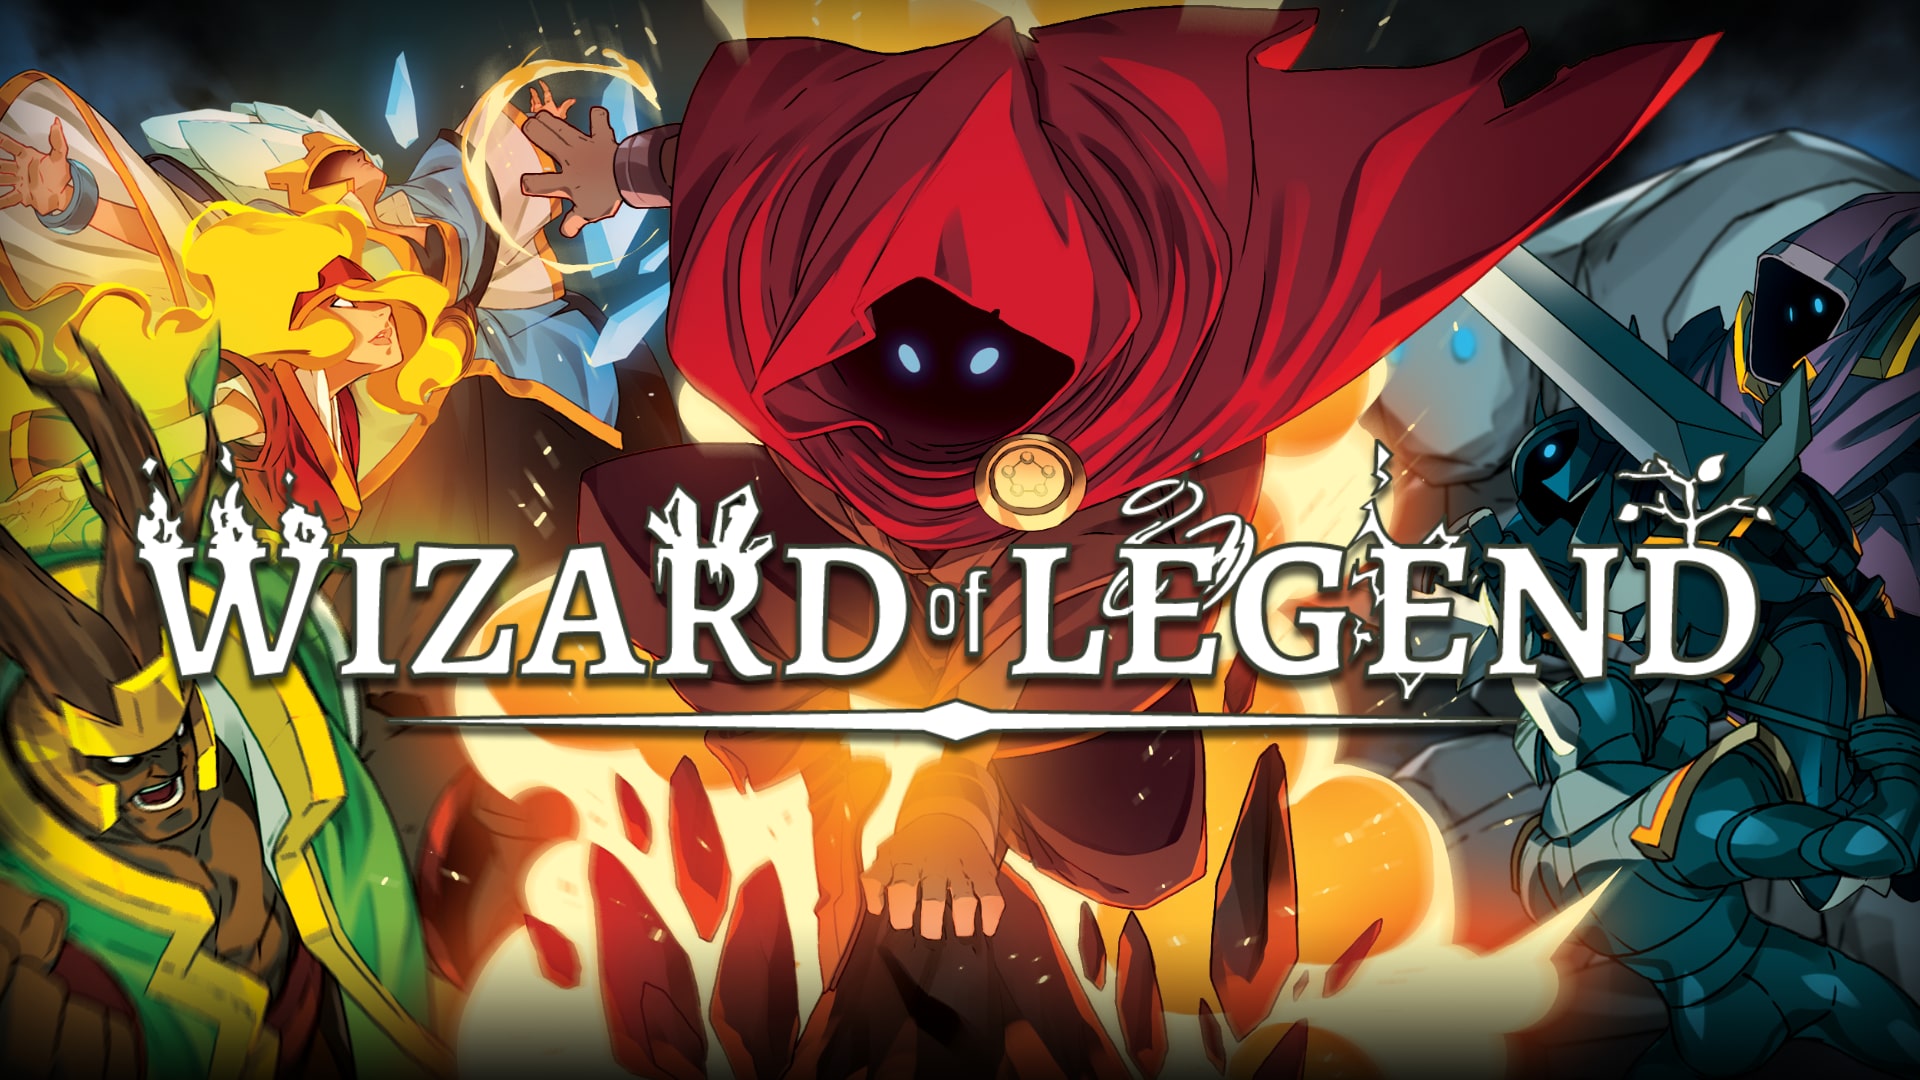 Wizard of Legend on the App Store